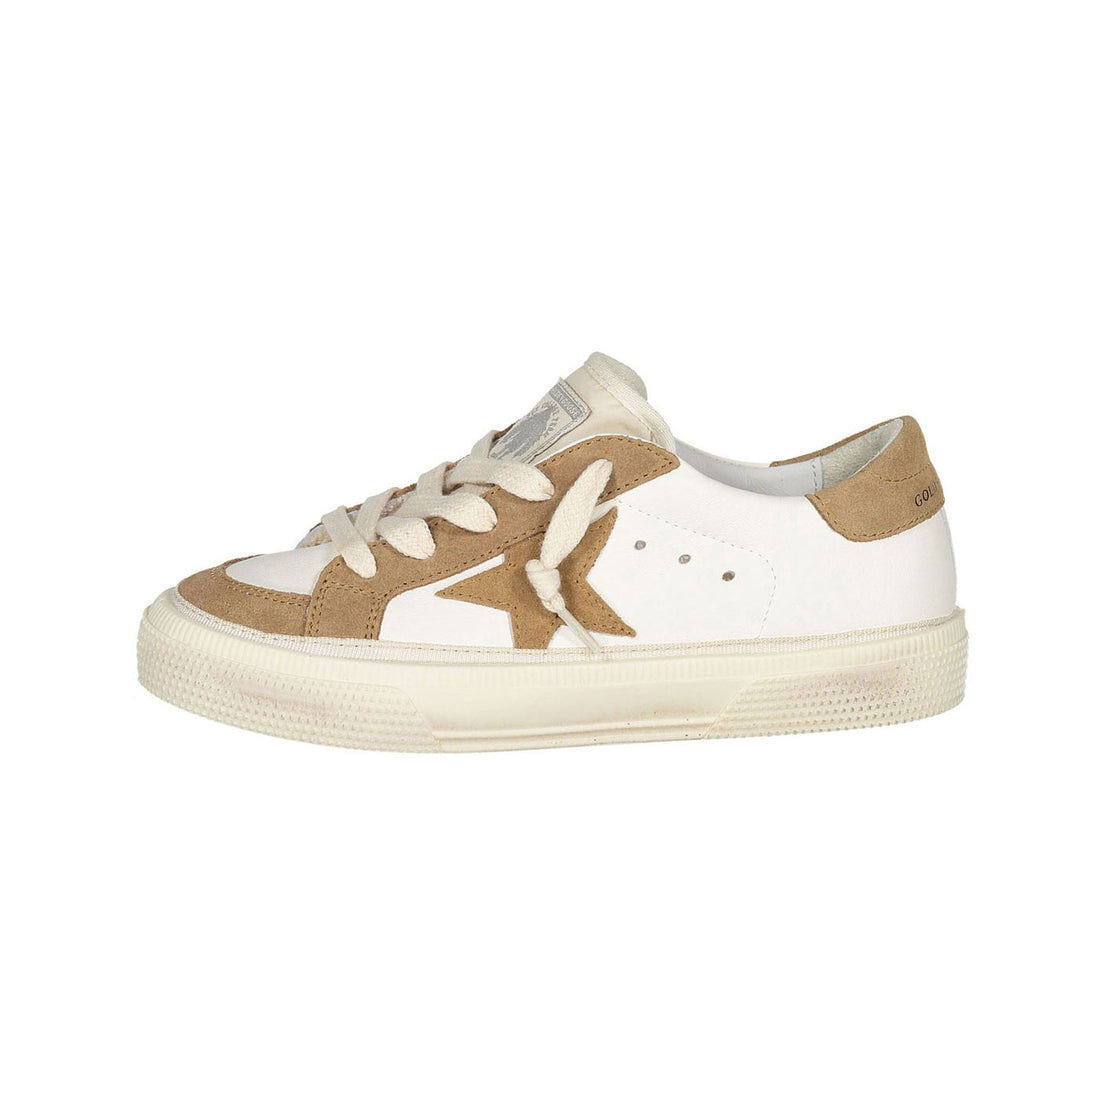 Golden Goose White/Light Brown May Nappa Upper Suede Sneakers